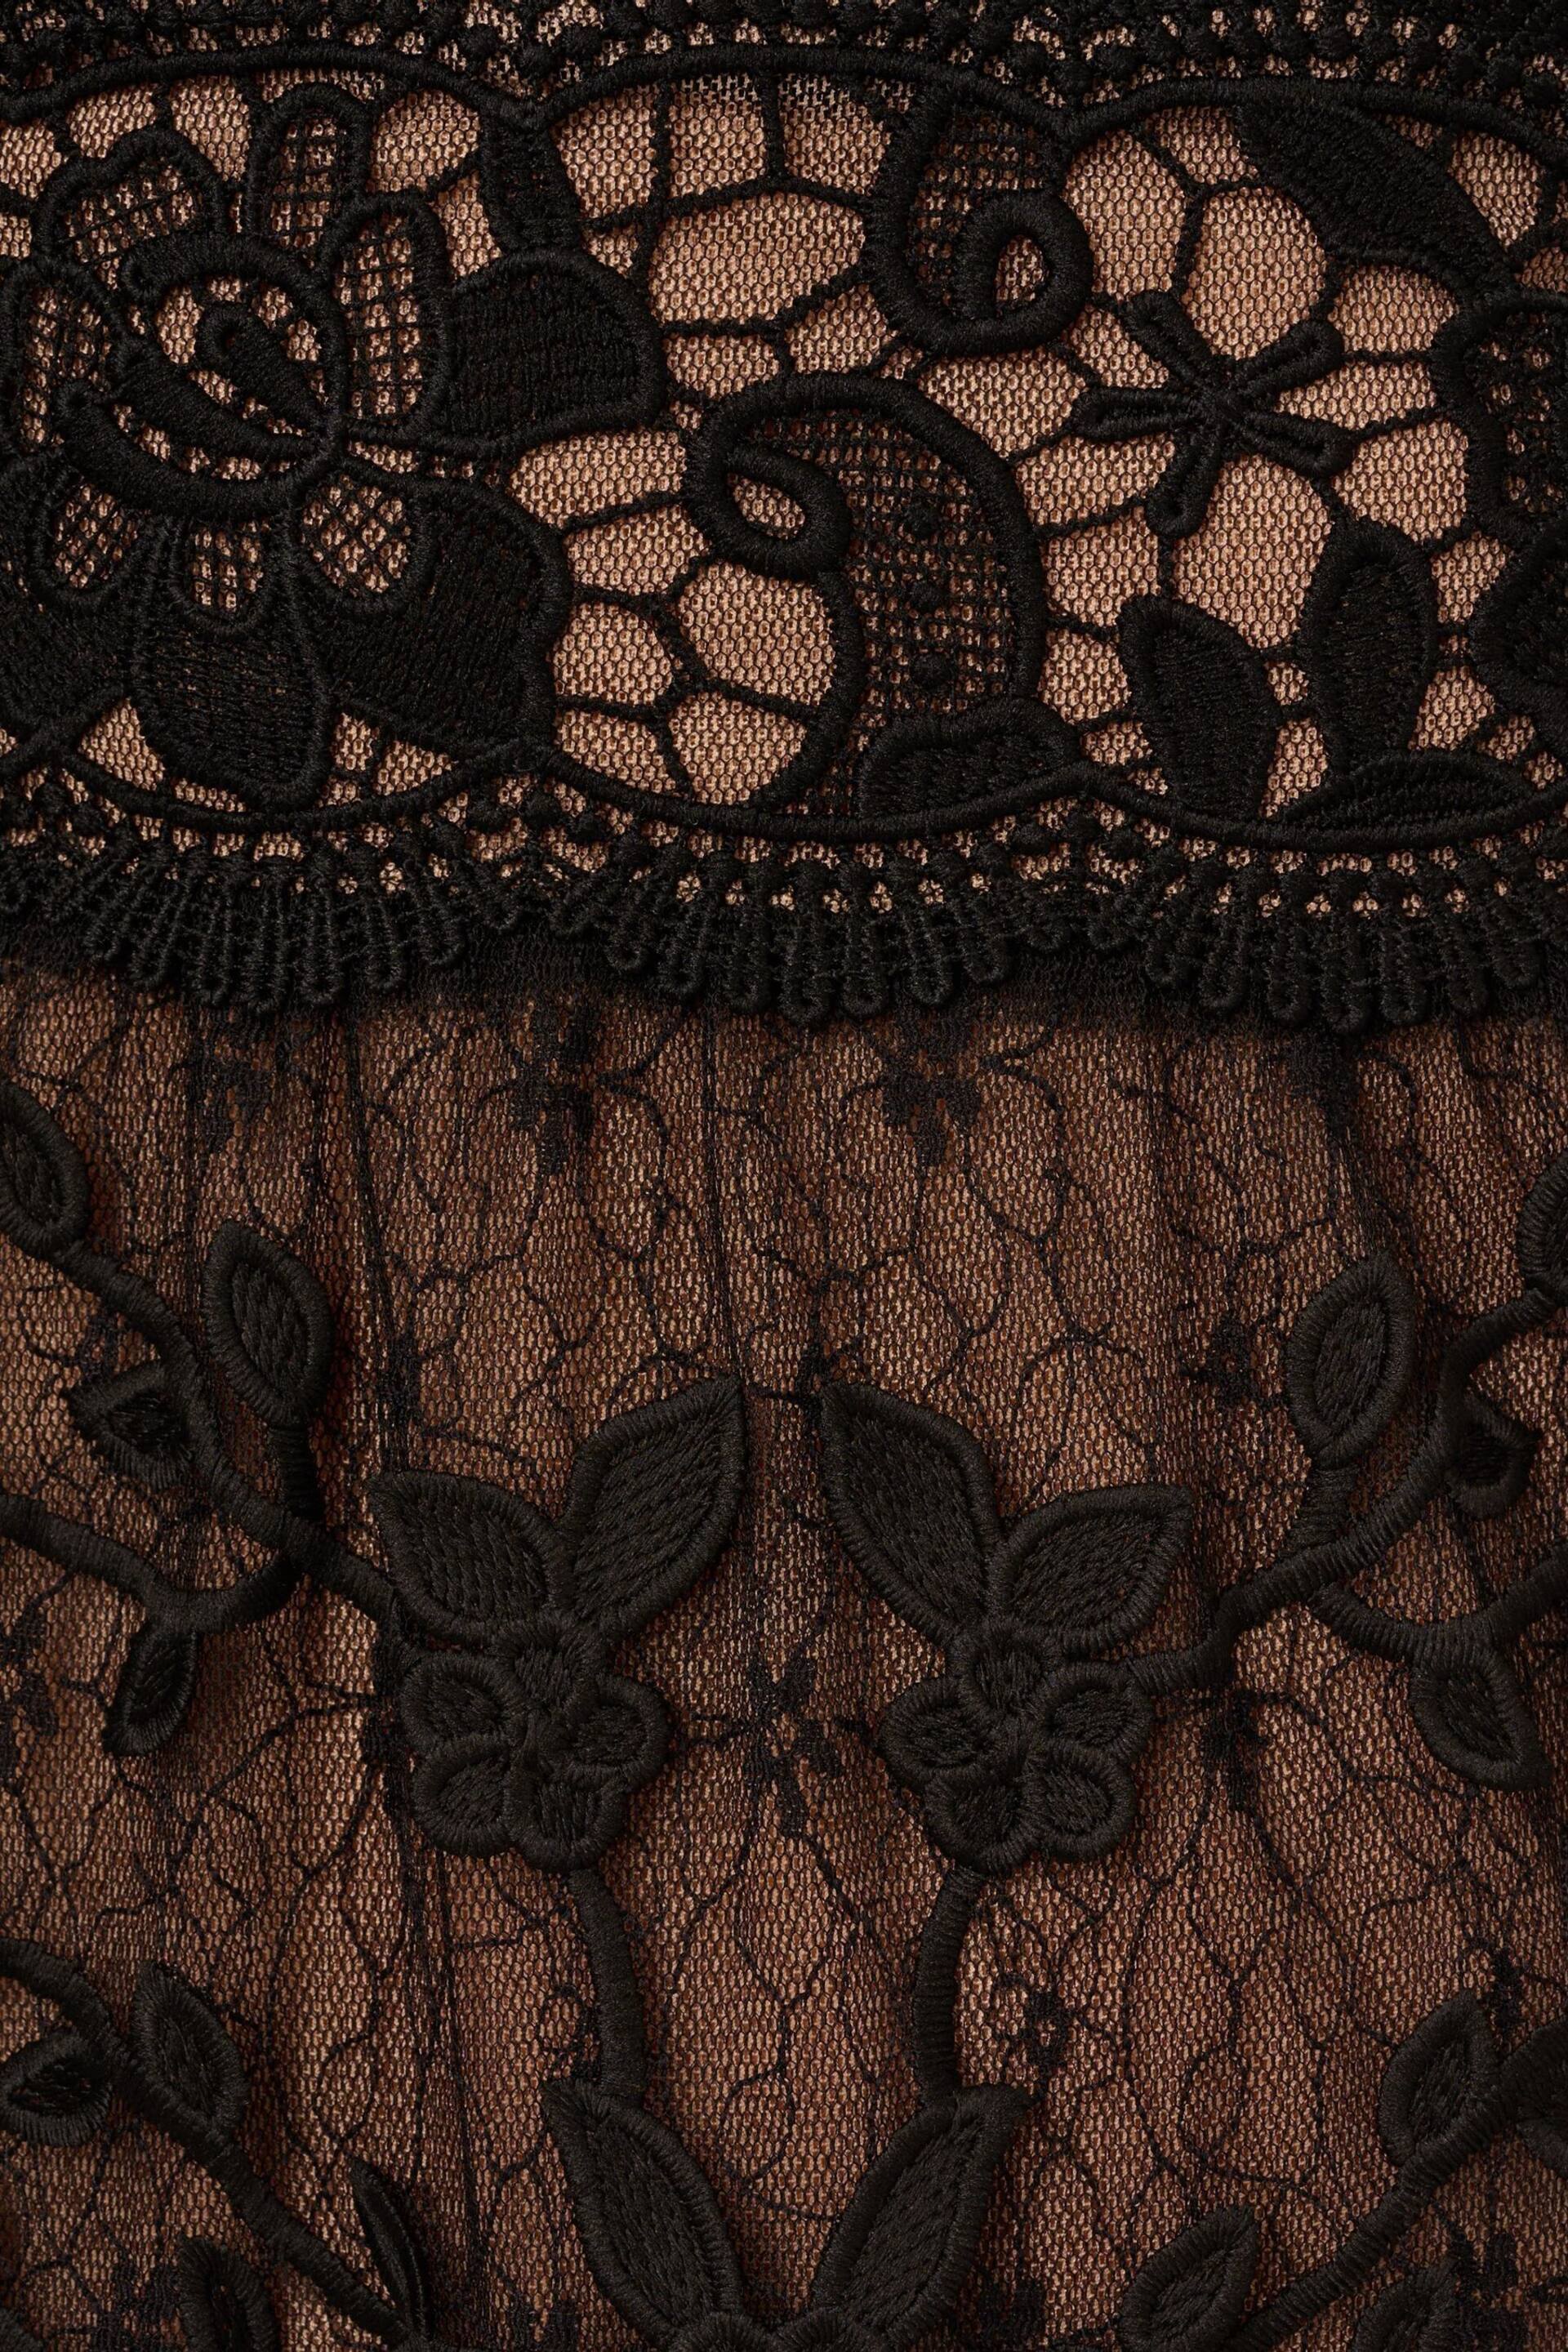 Adrianna Papell Lace Embroidery Black Dress - Image 3 of 8